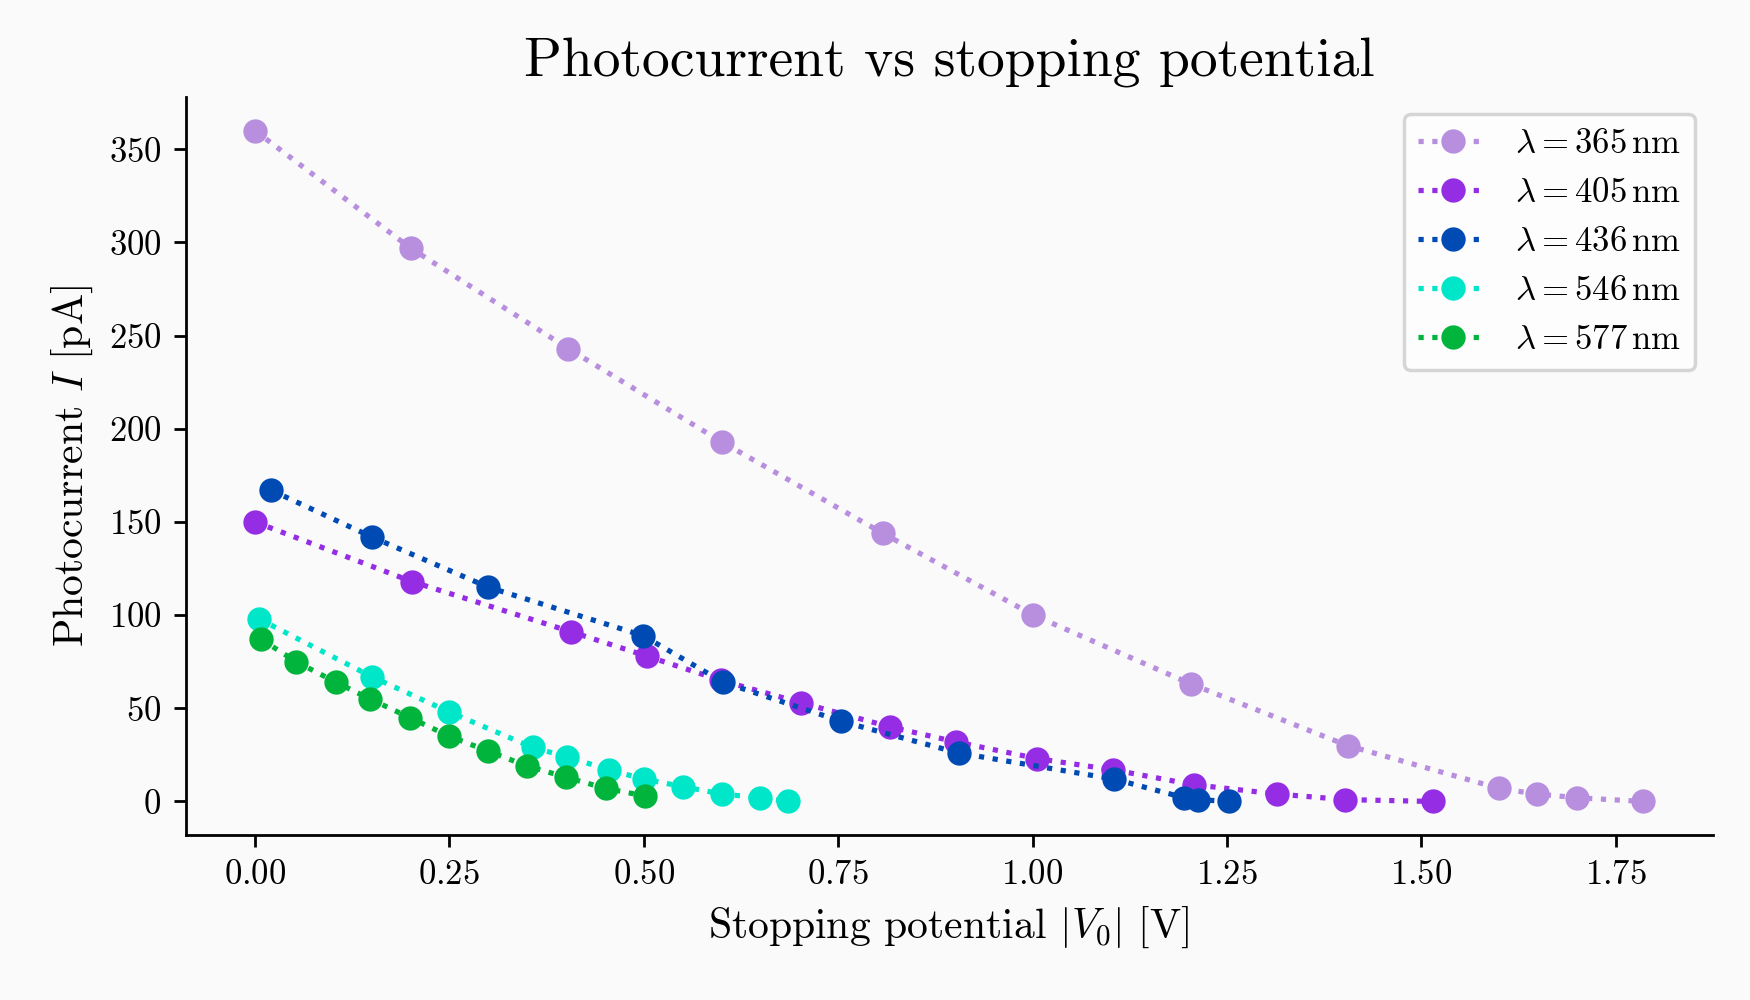 Plot of photocurrent vs stopping potential at various photon frequencies.